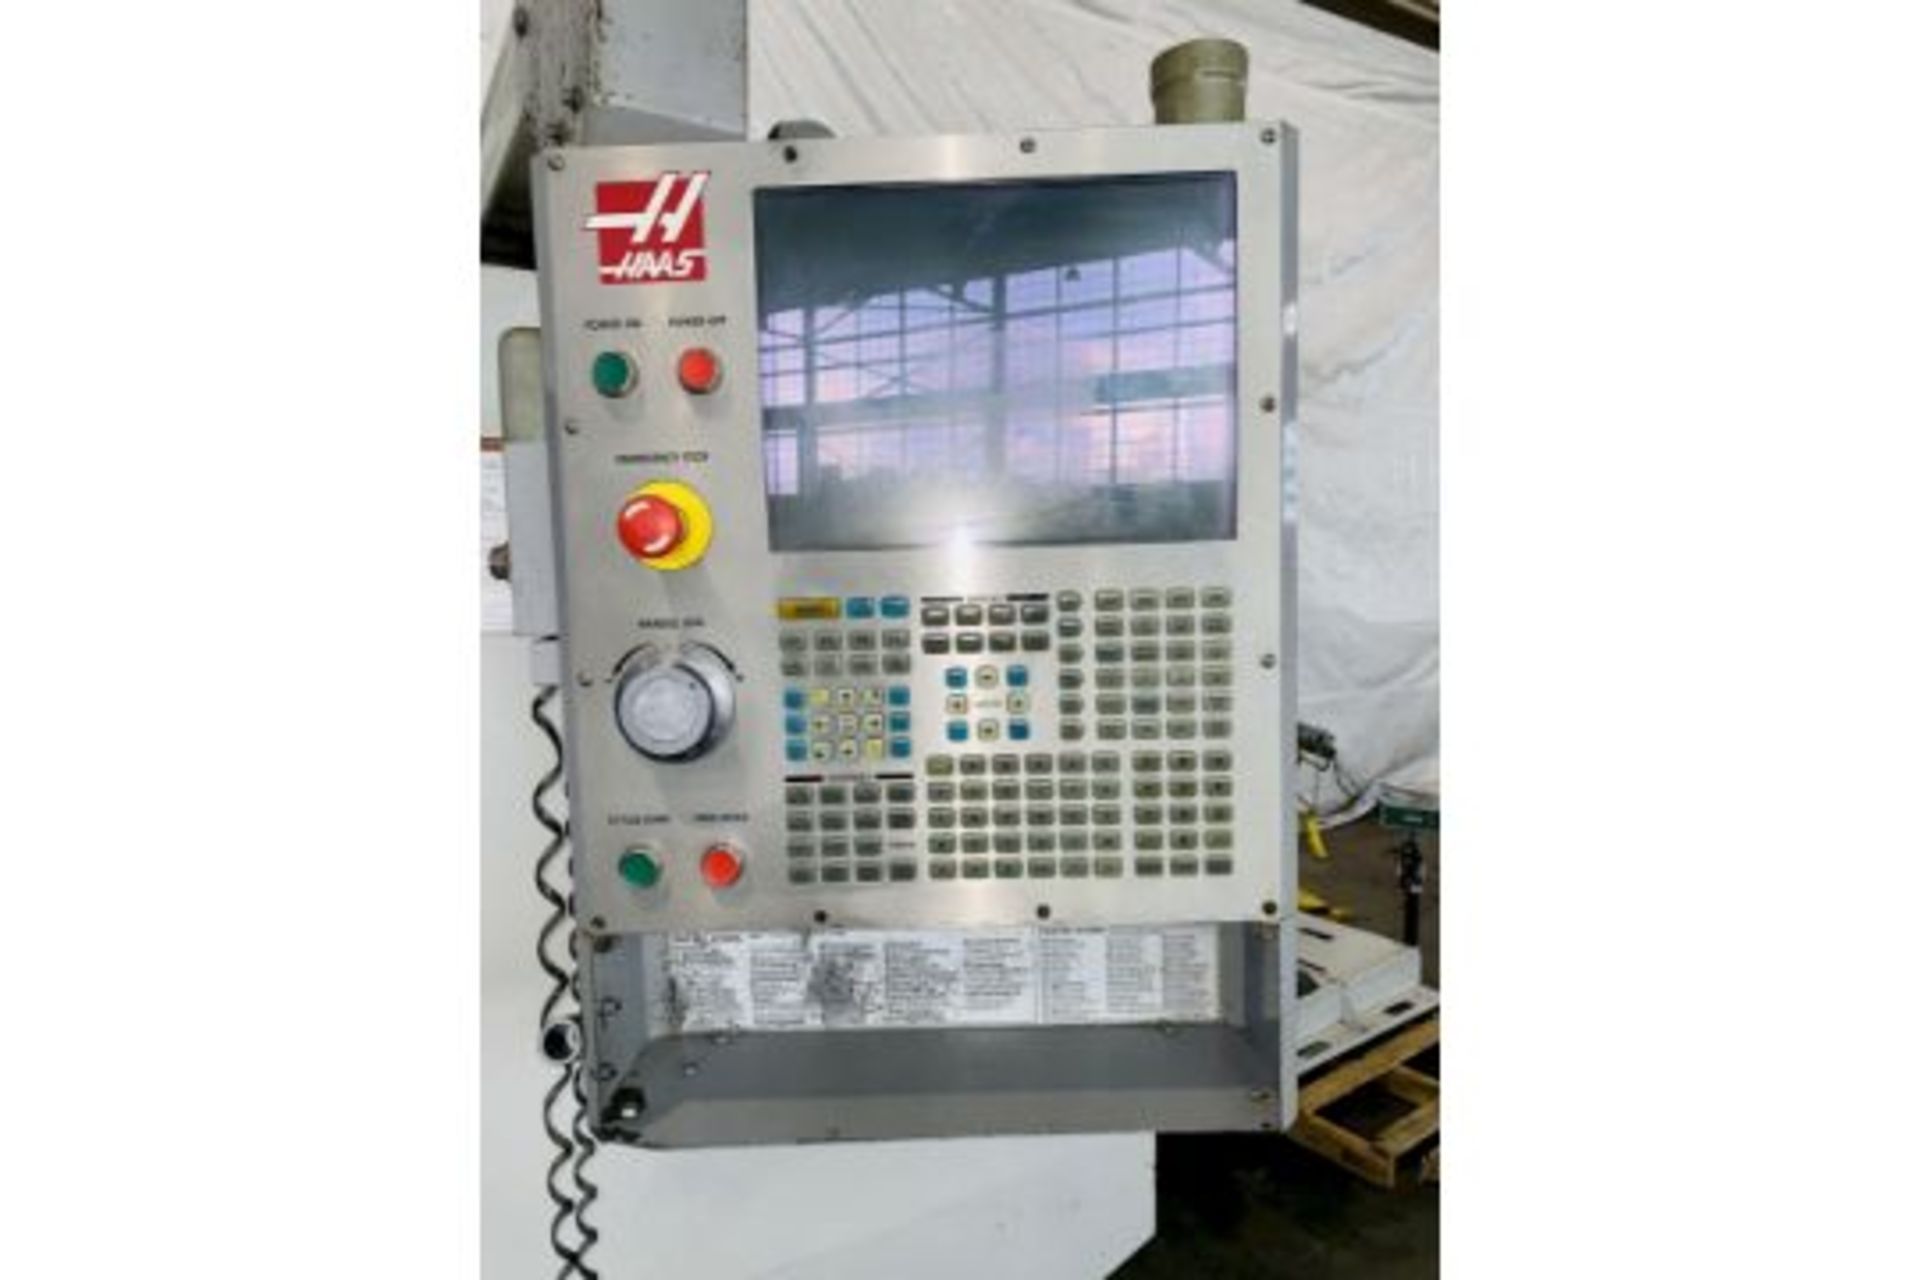 (2006) HAAS VF-7D/40 CNC VERTICAL MACHINING CENTER - Image 13 of 15